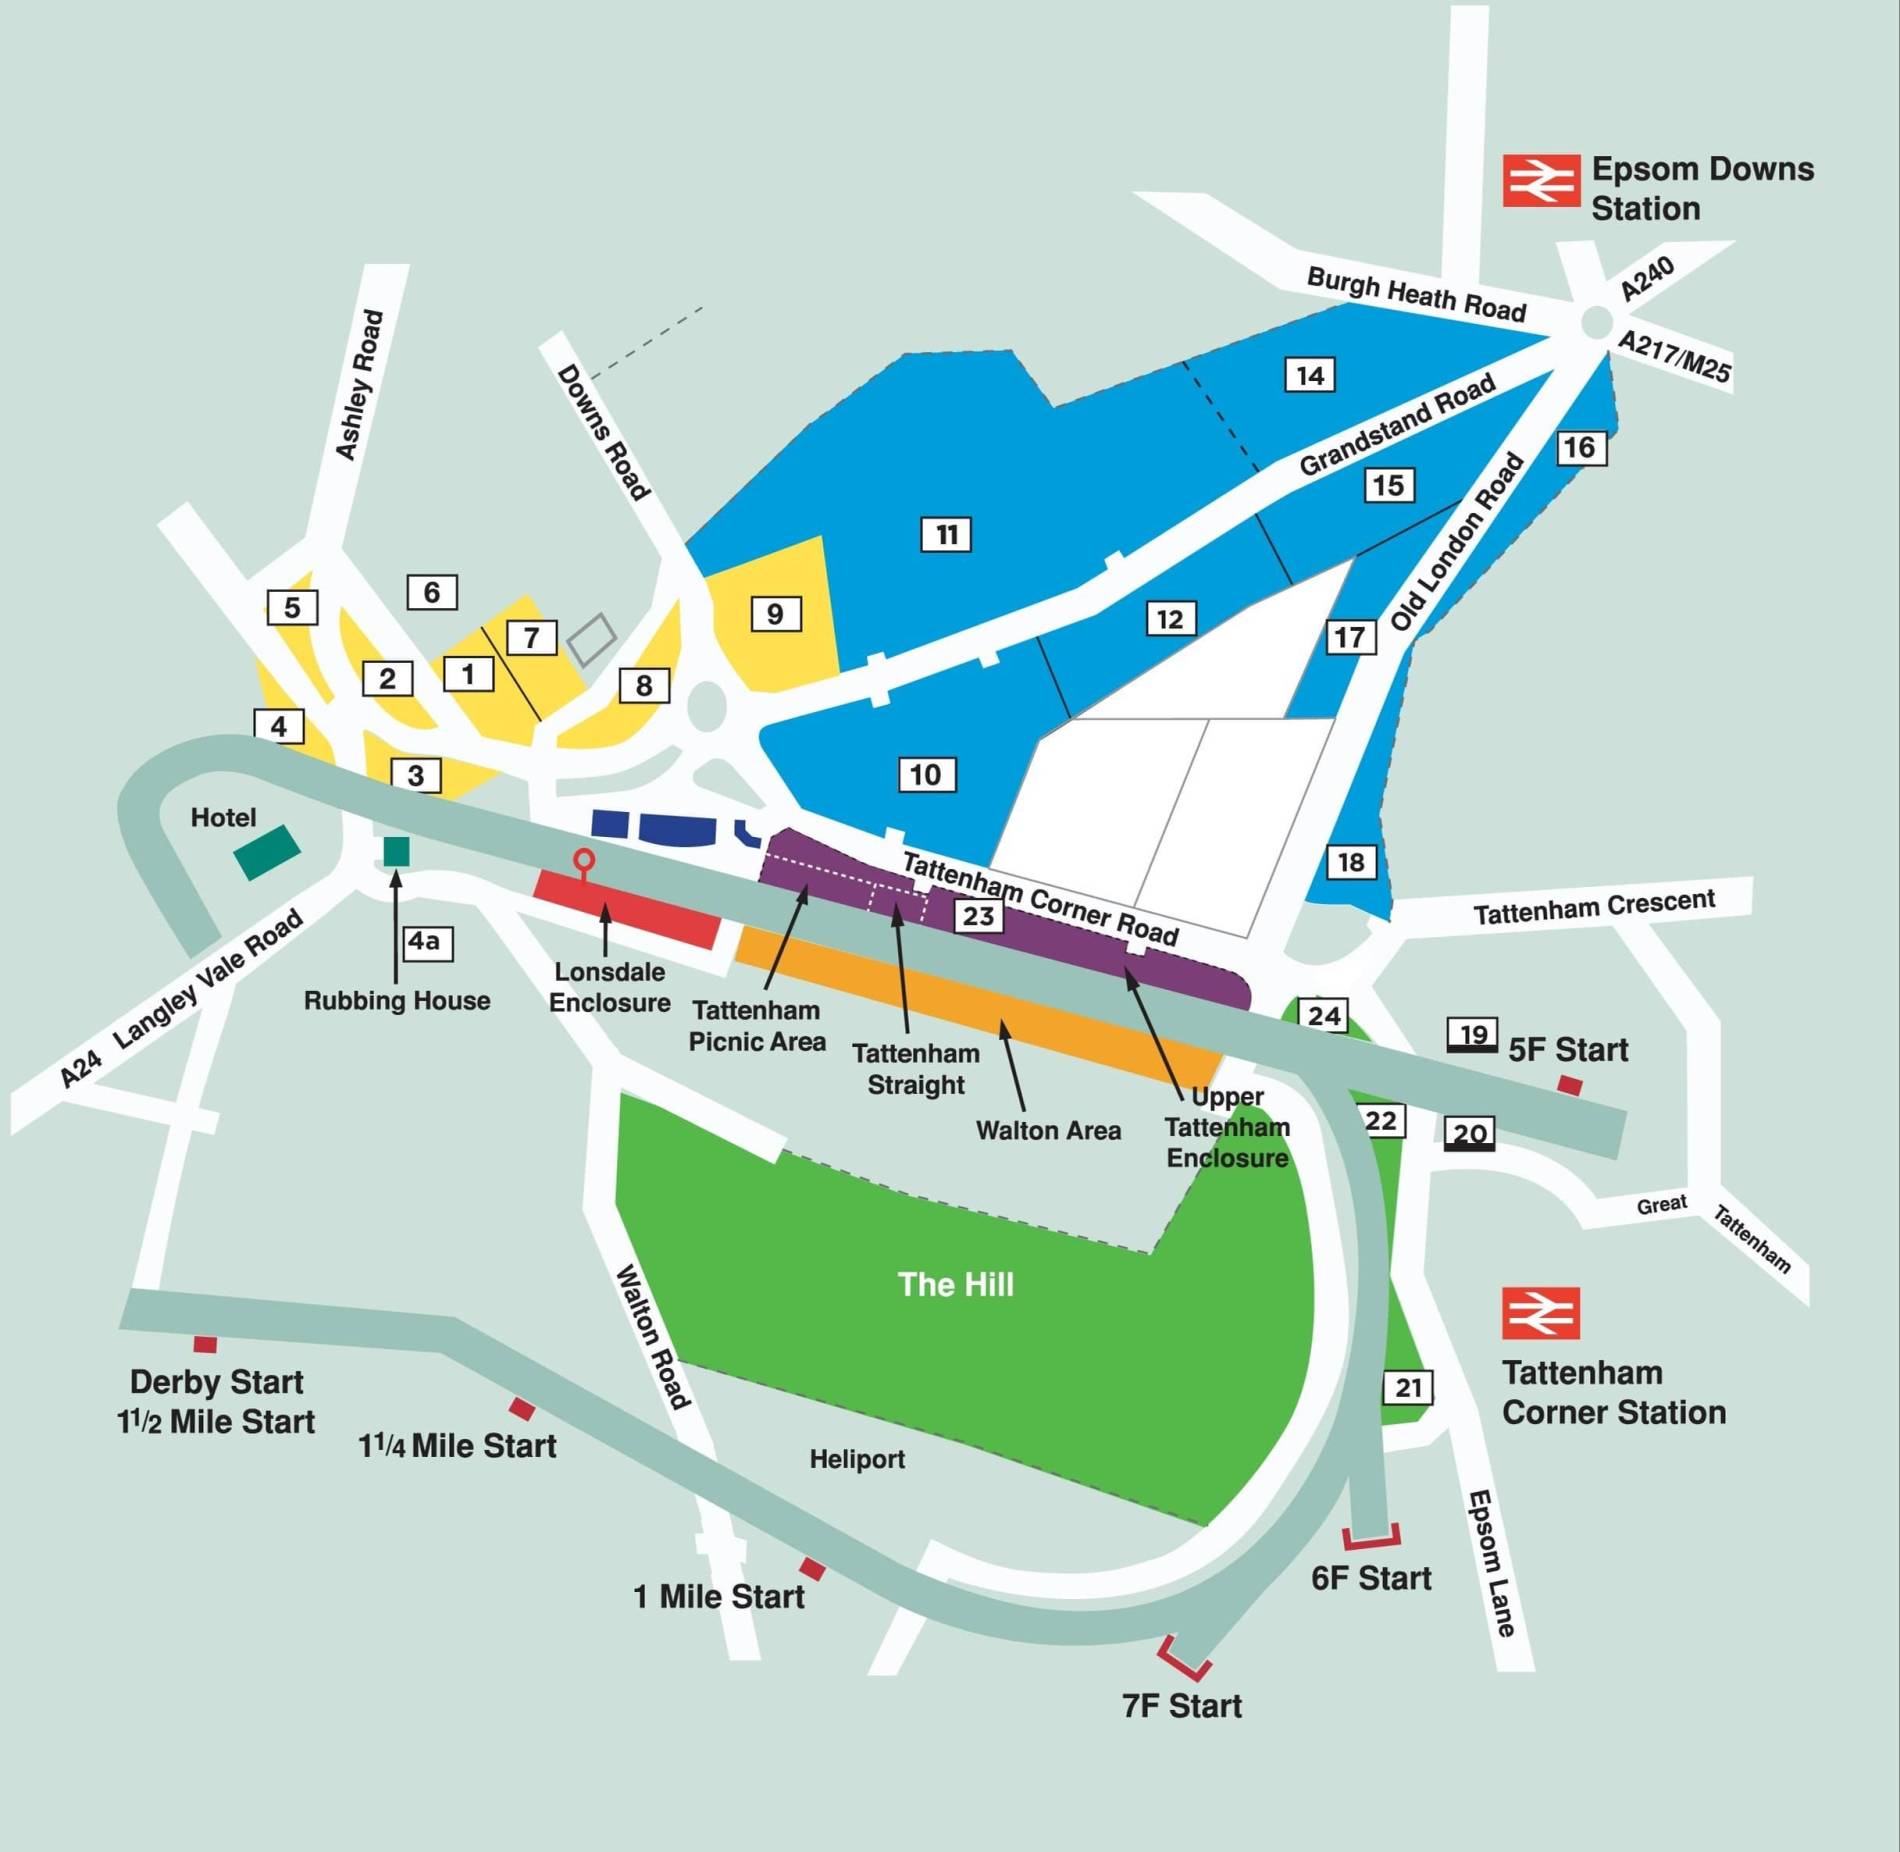 Epsom Downs Parking Map 41131 